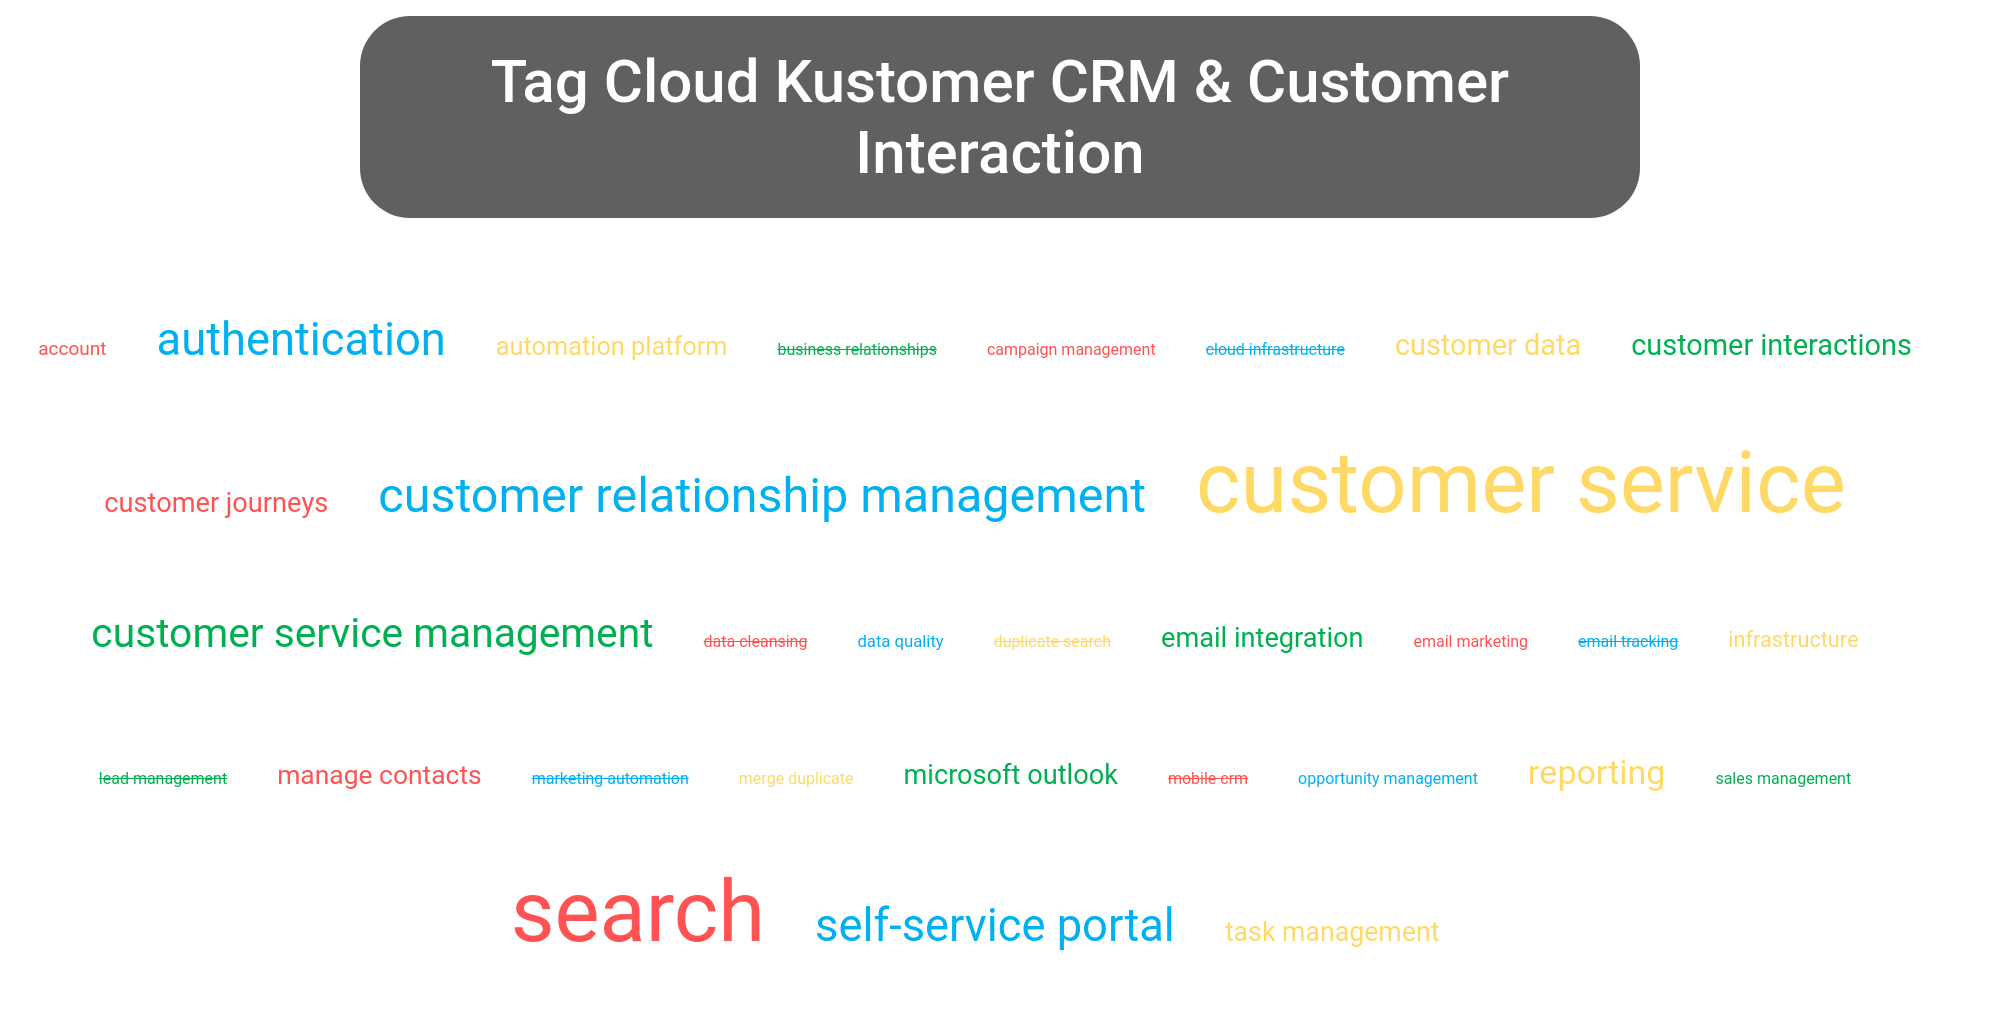 Tag cloud of the Kustomer CRM tools.